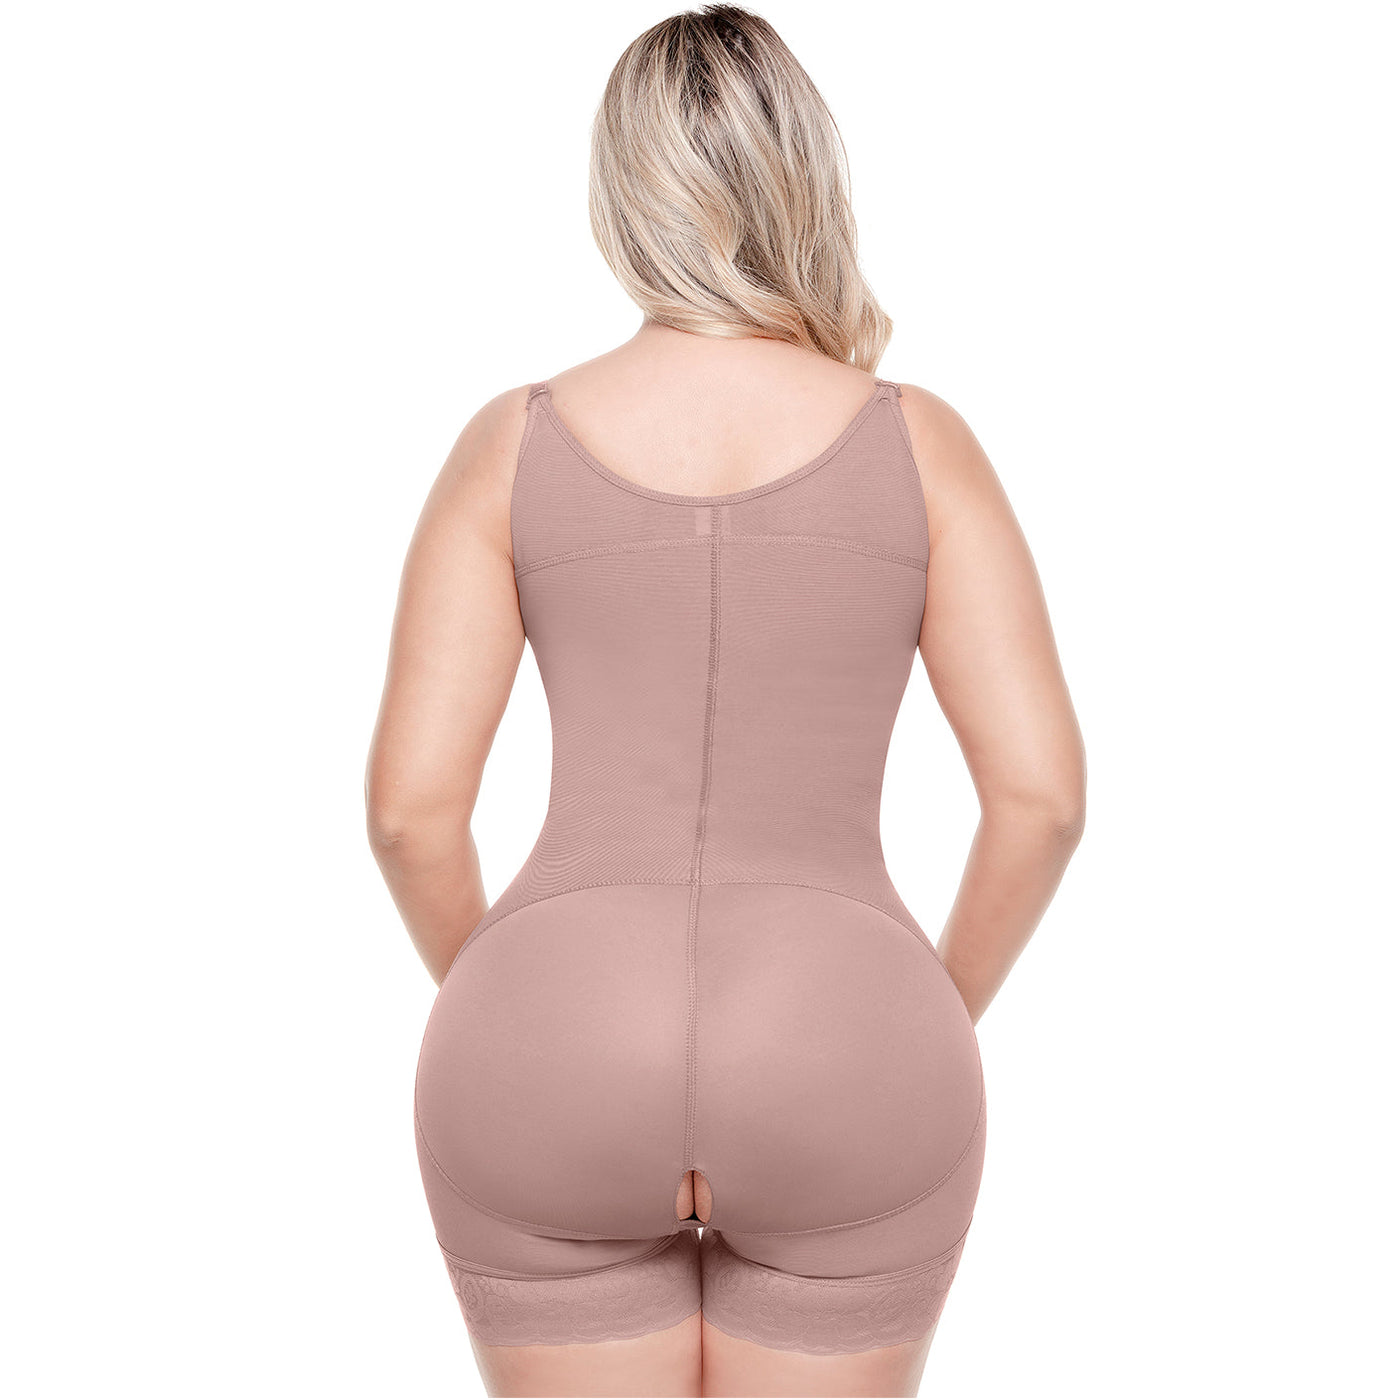 SONRYSE 046 | Colombian Butt Lifter Bodysuit Shapewear | Everyday and Postpartum Use | Powernet